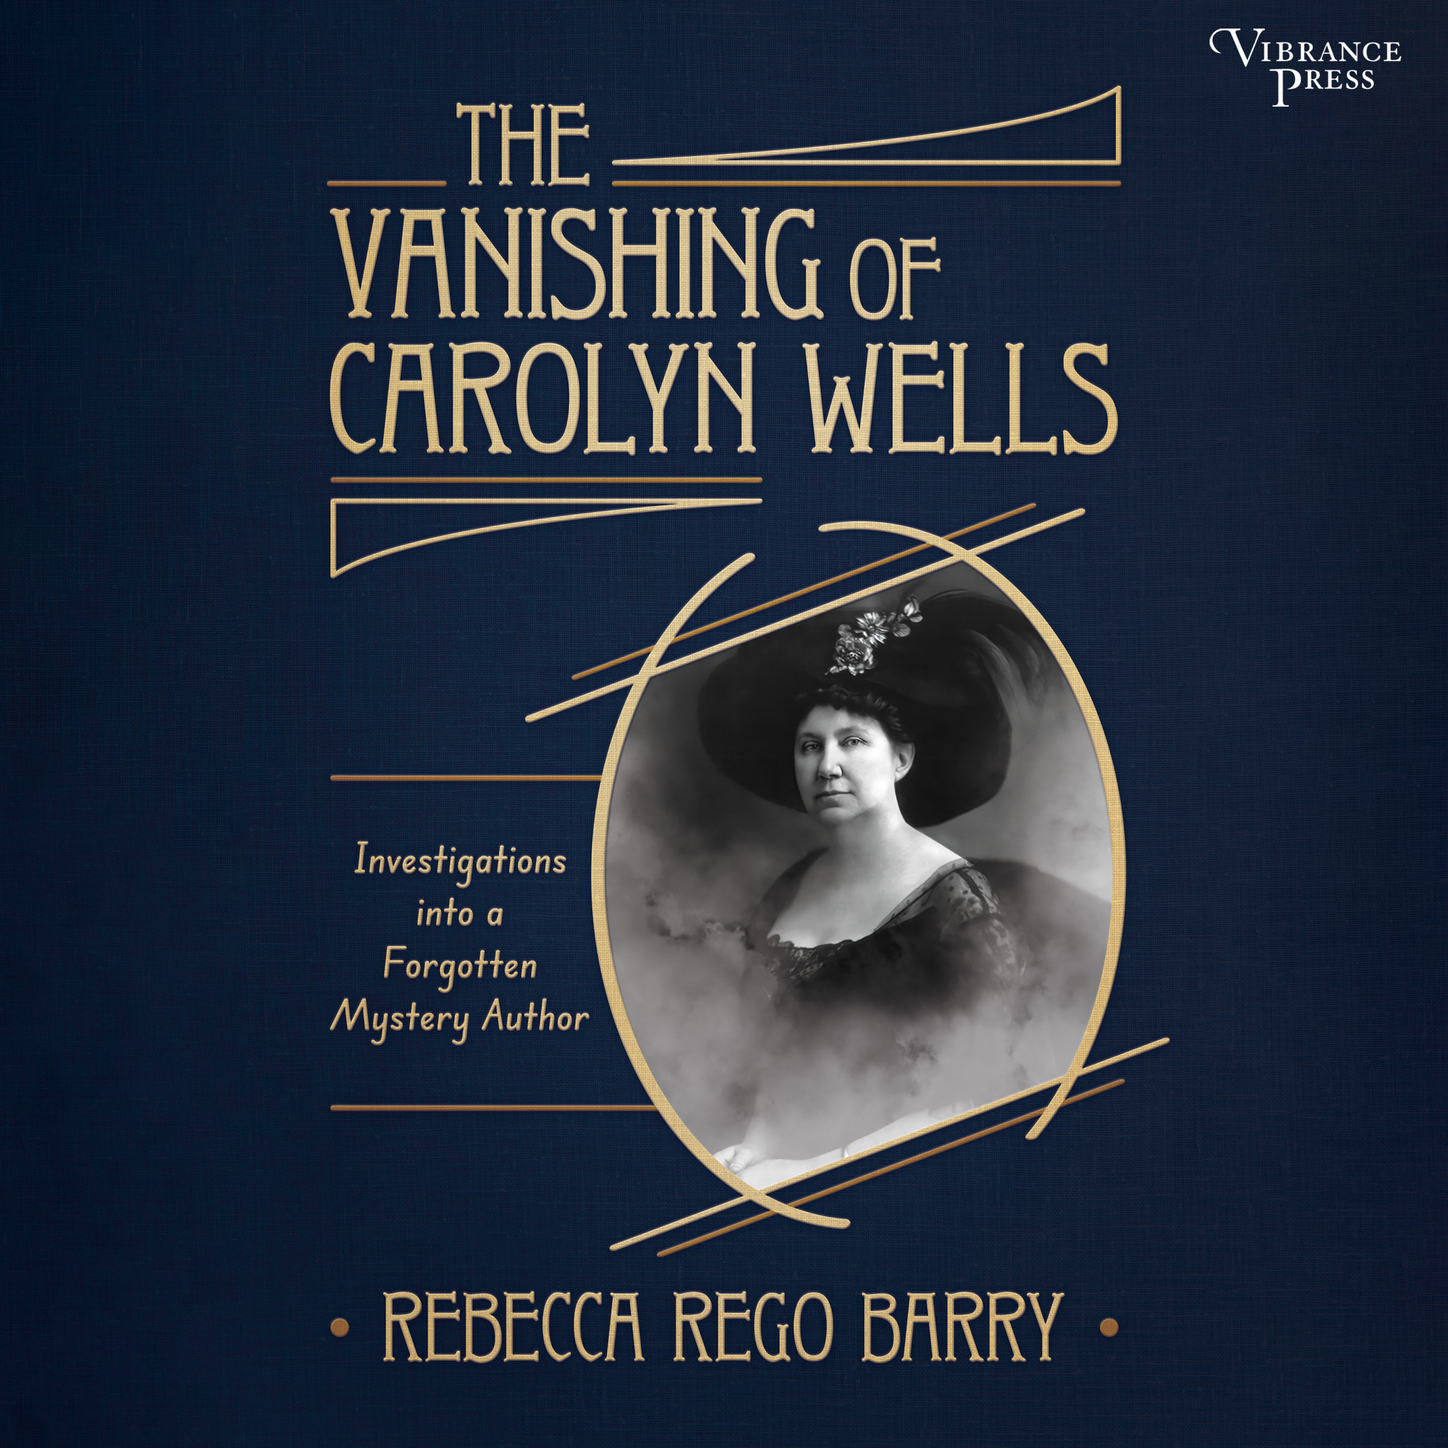 The Vanishing of Carolyn Wells - Investigations into a Forgotten Mystery Author (Unabridged)